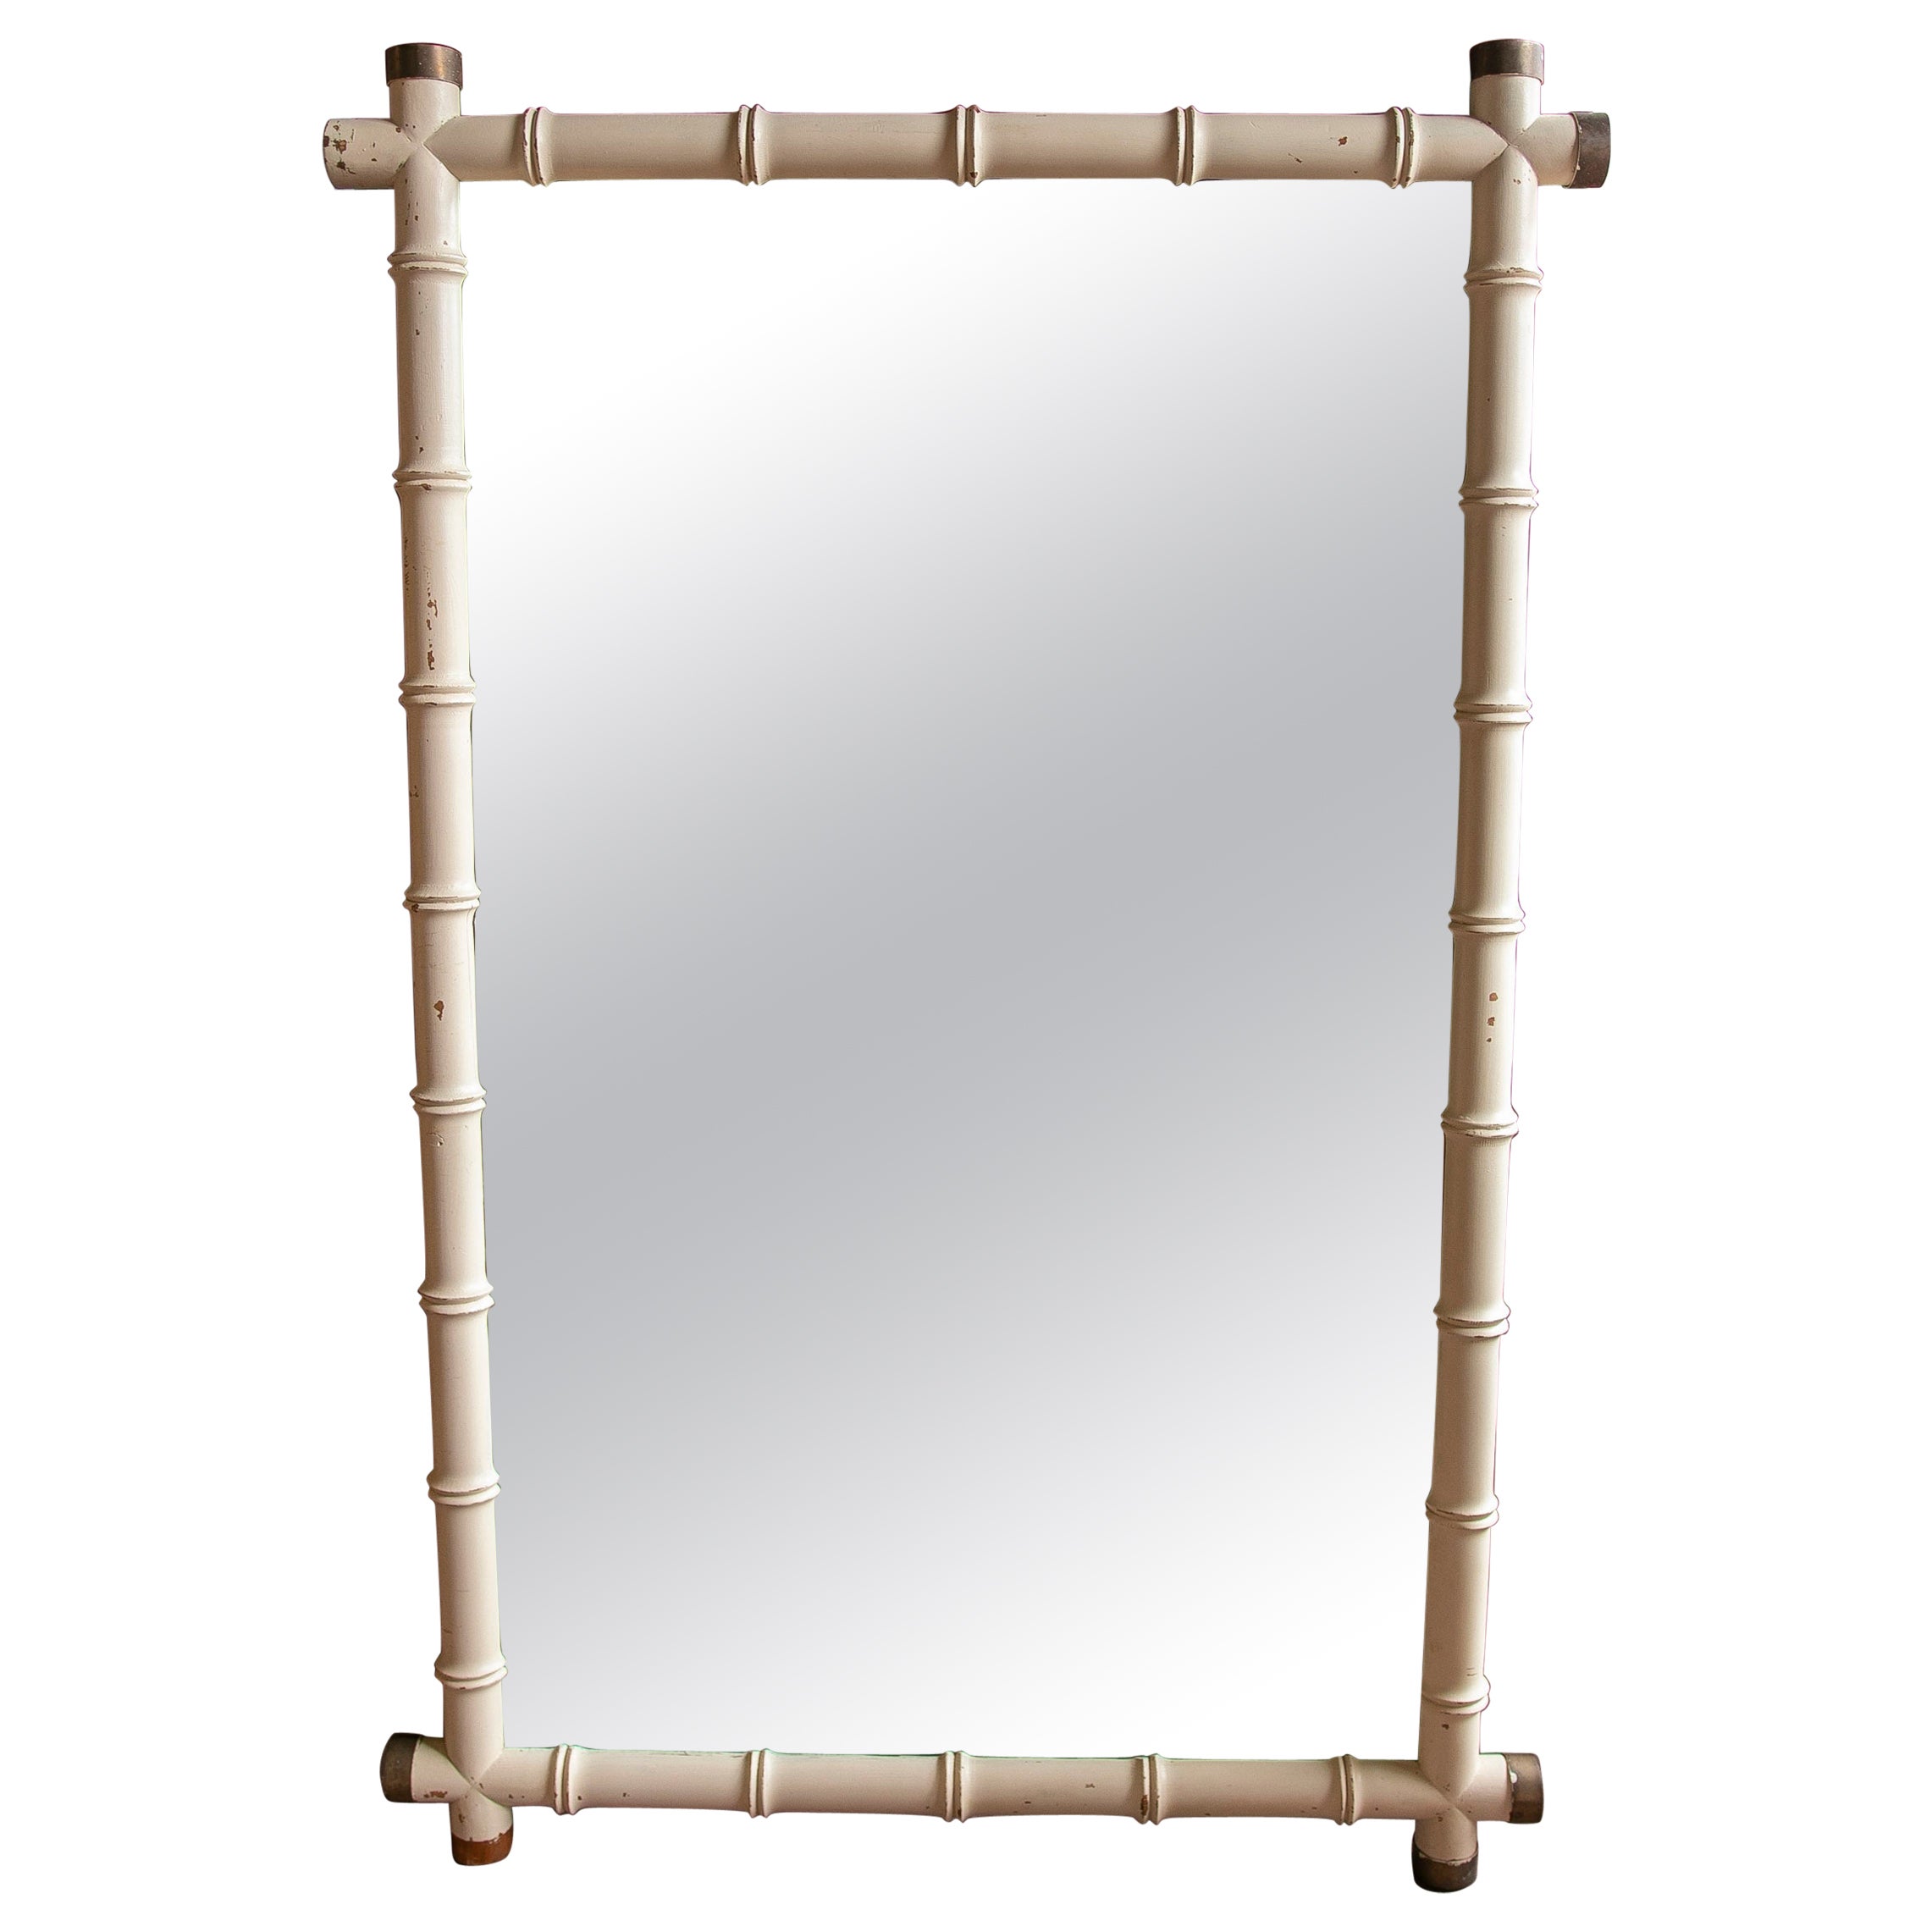 1970s Wooden Wall Mirror Imitating Bamboo with Brass Corners 